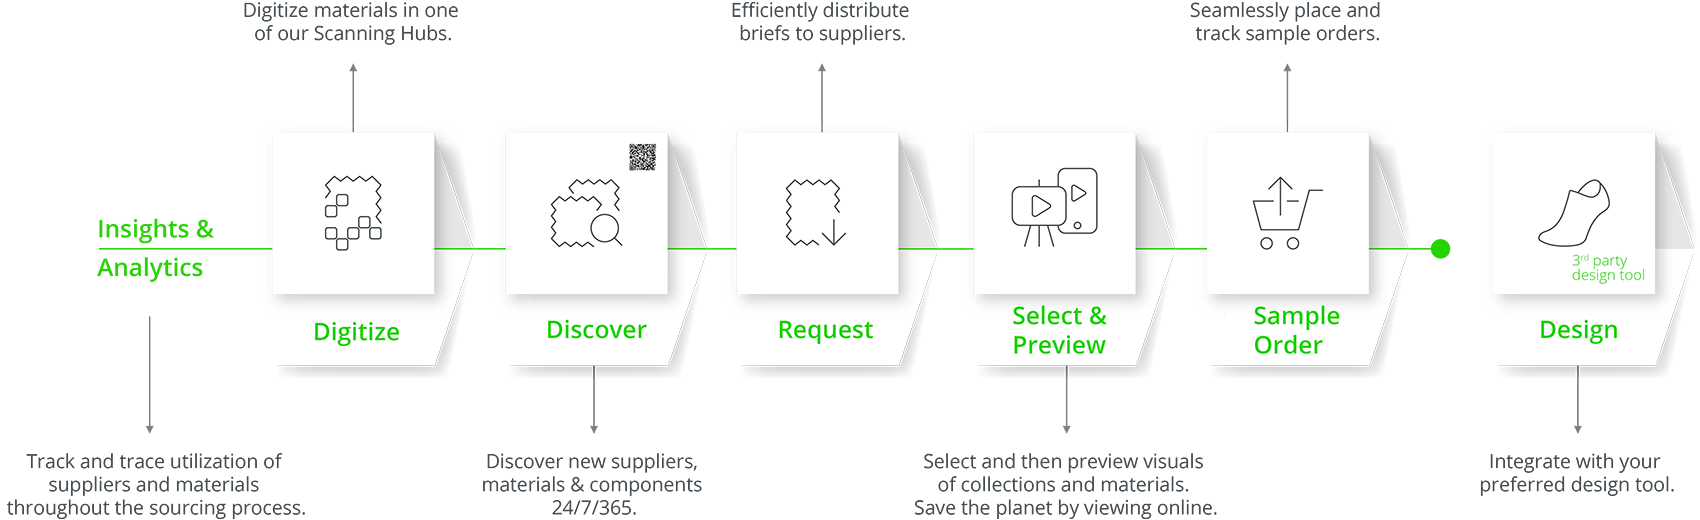 material sourcing workflow